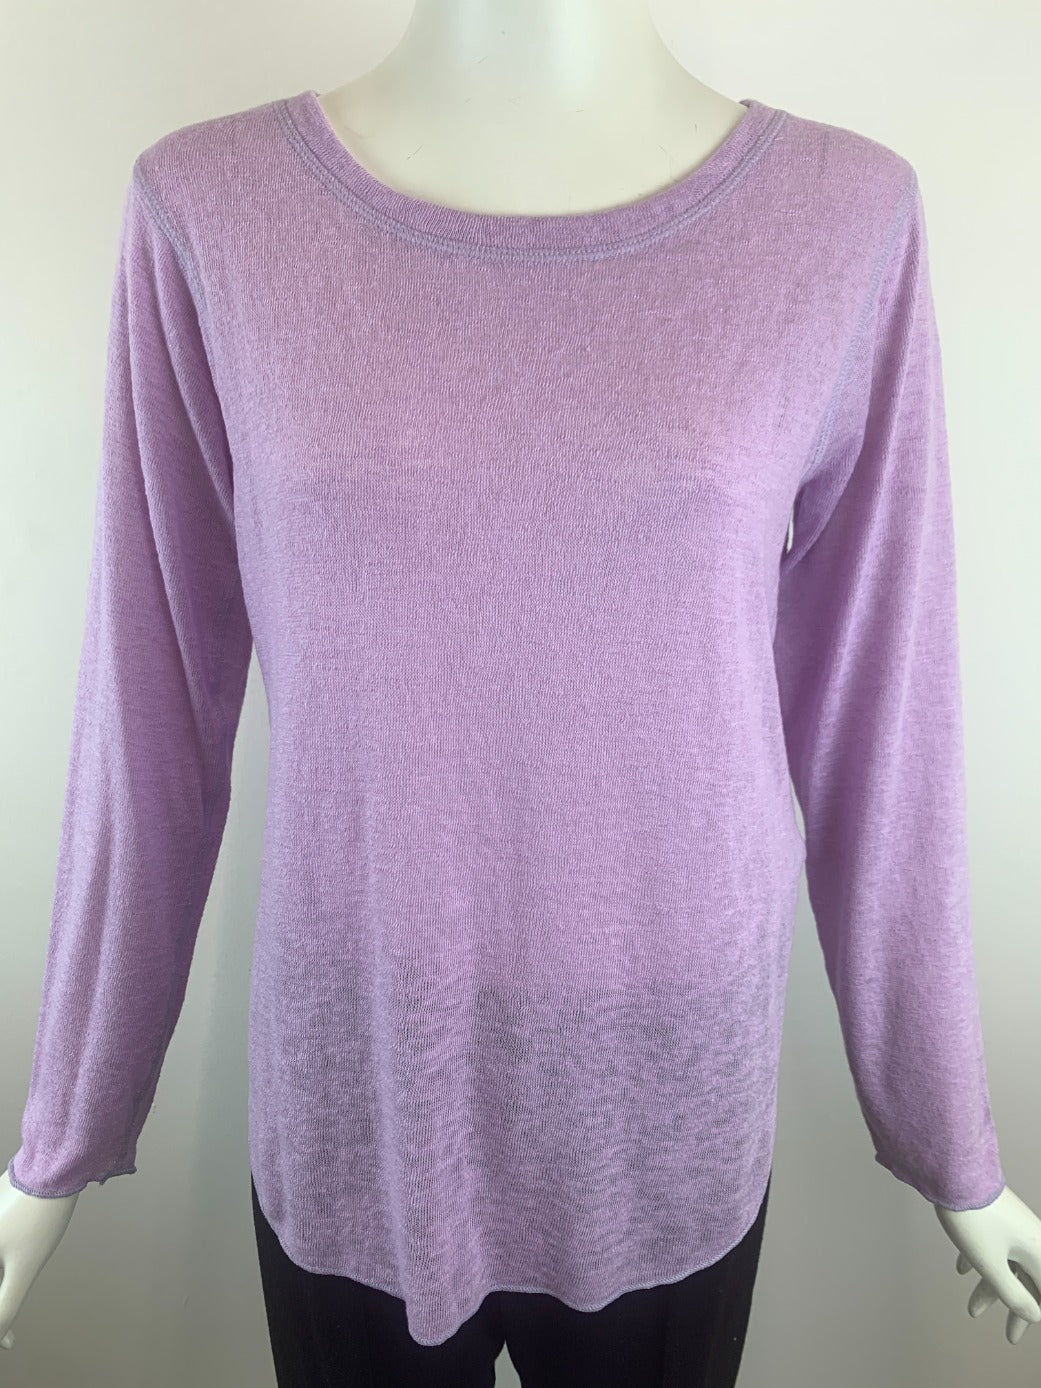 Nally & Millie Long Sleeve Rounded Hem Top - Lavender available at The Good Life Boutique